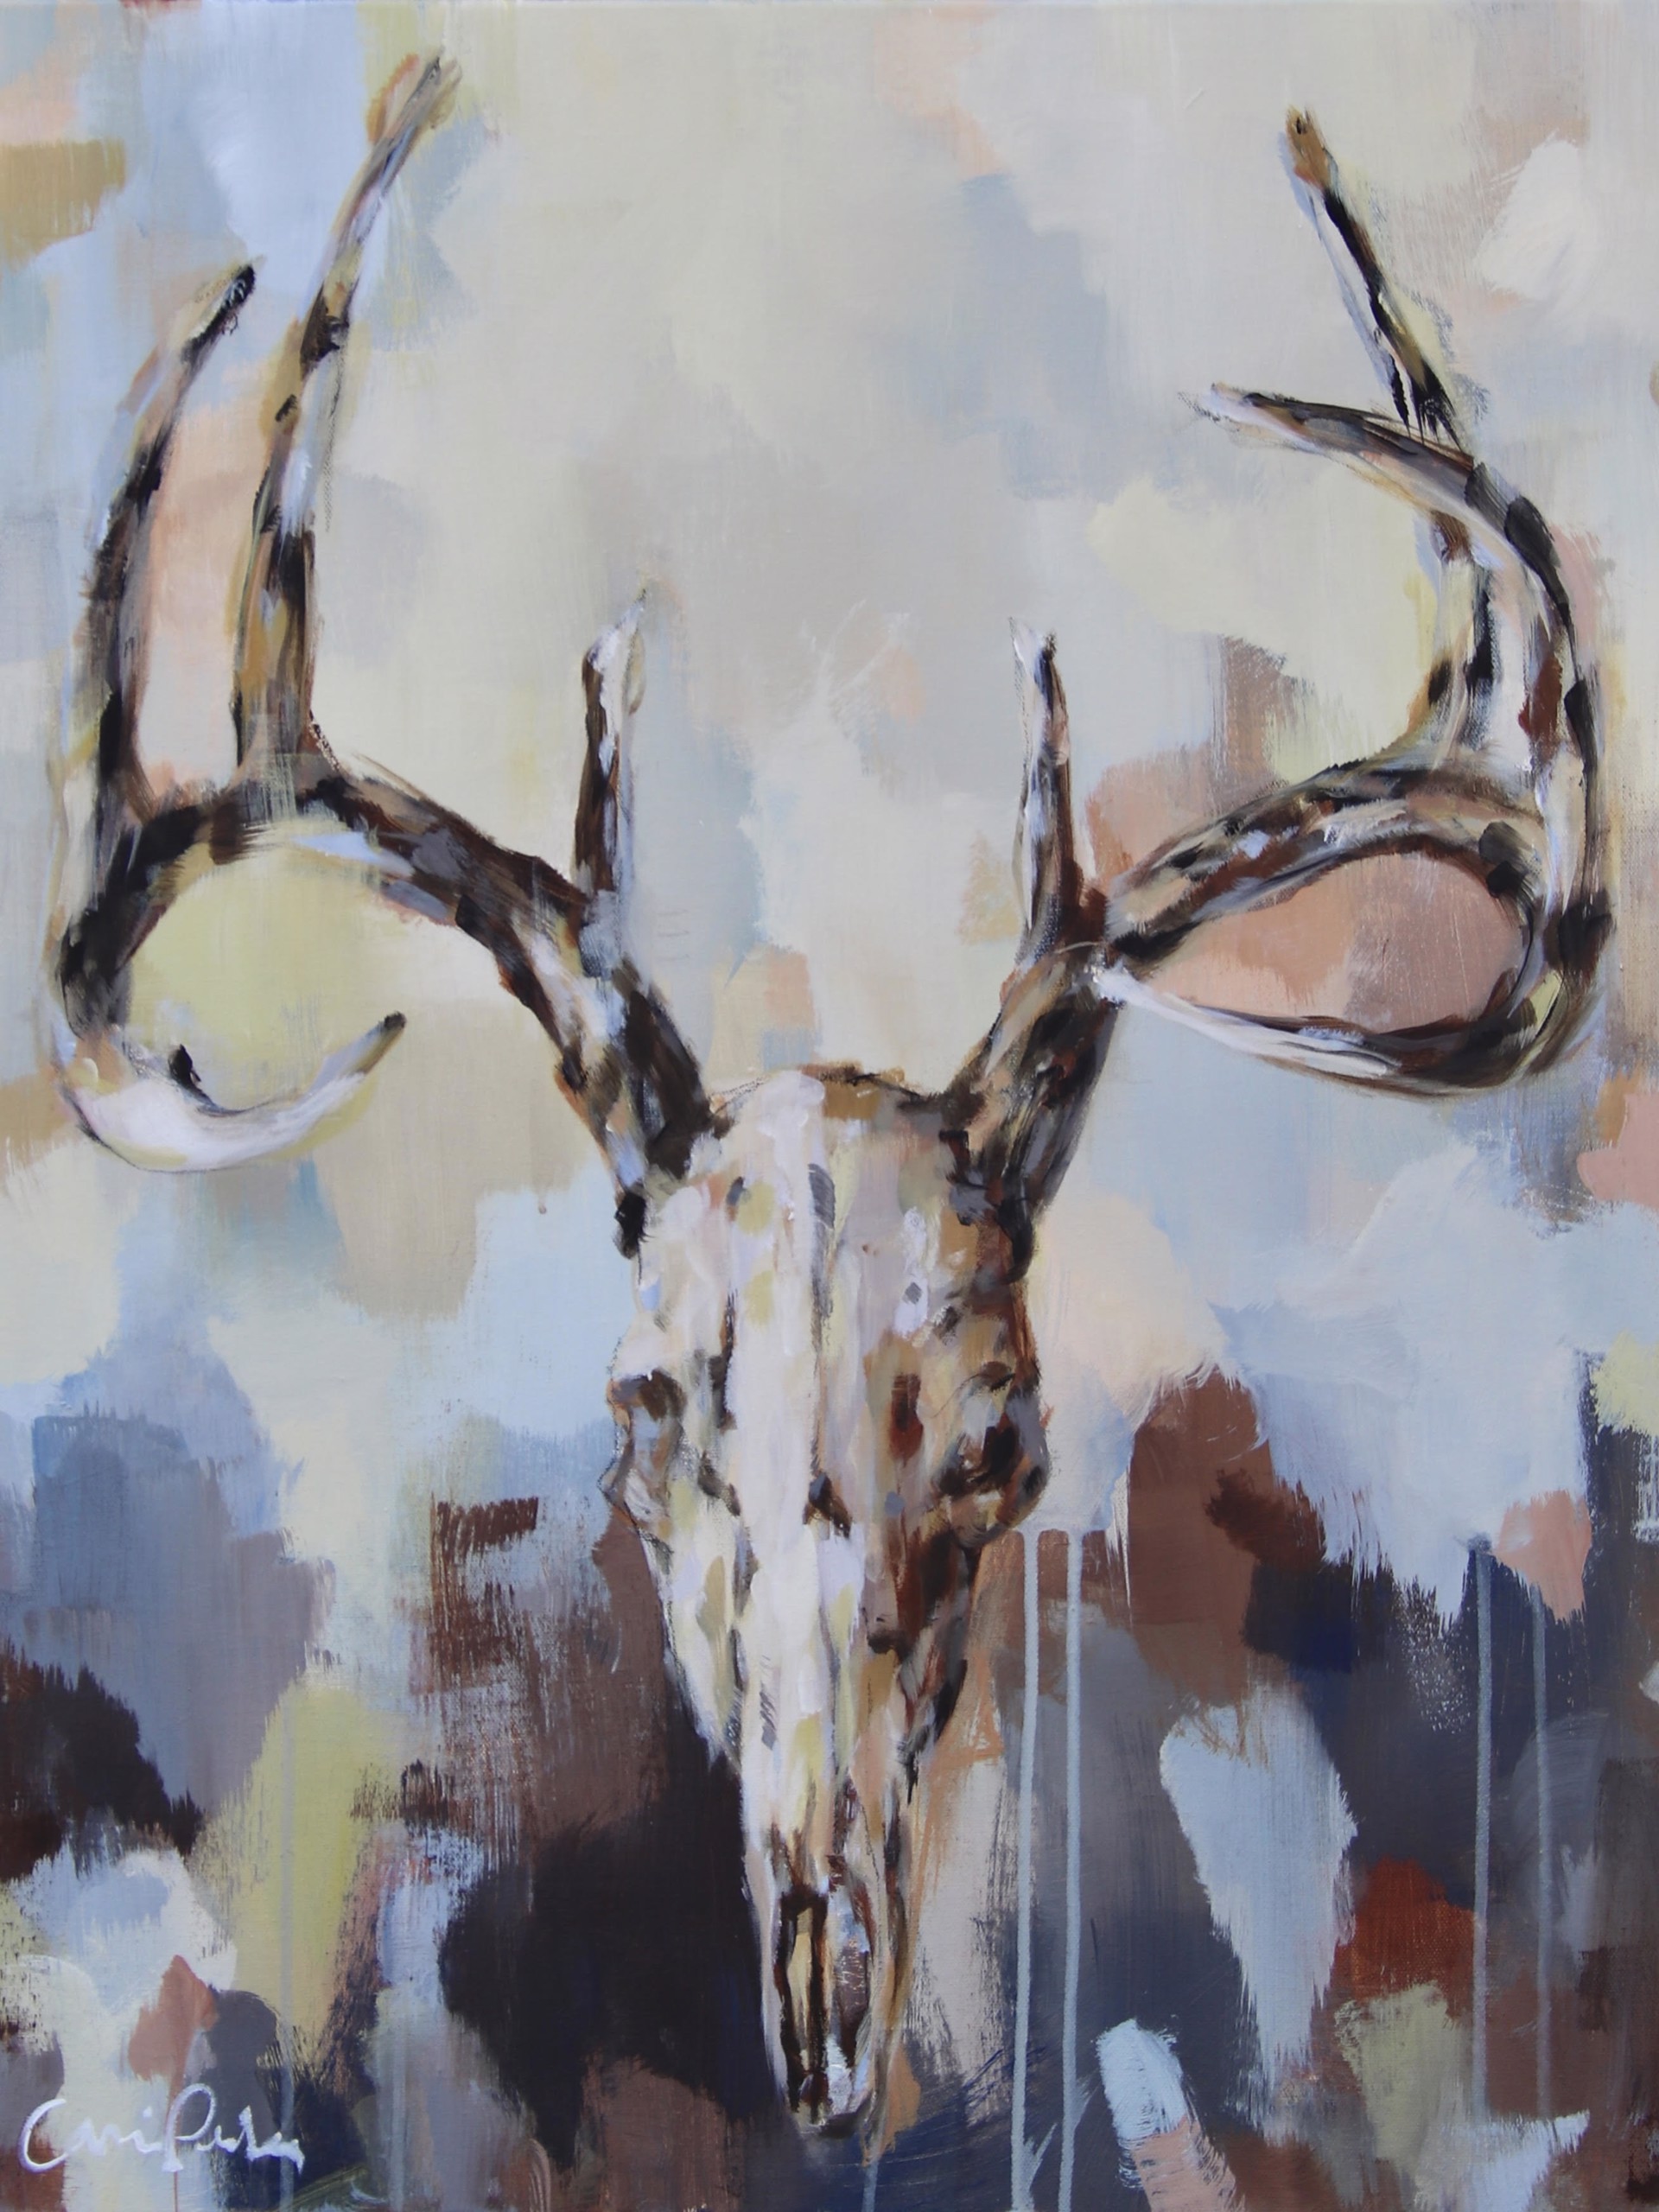 Original Painting Of A Skull On a Light and Neutral Background With Blues, By Carrie Penley